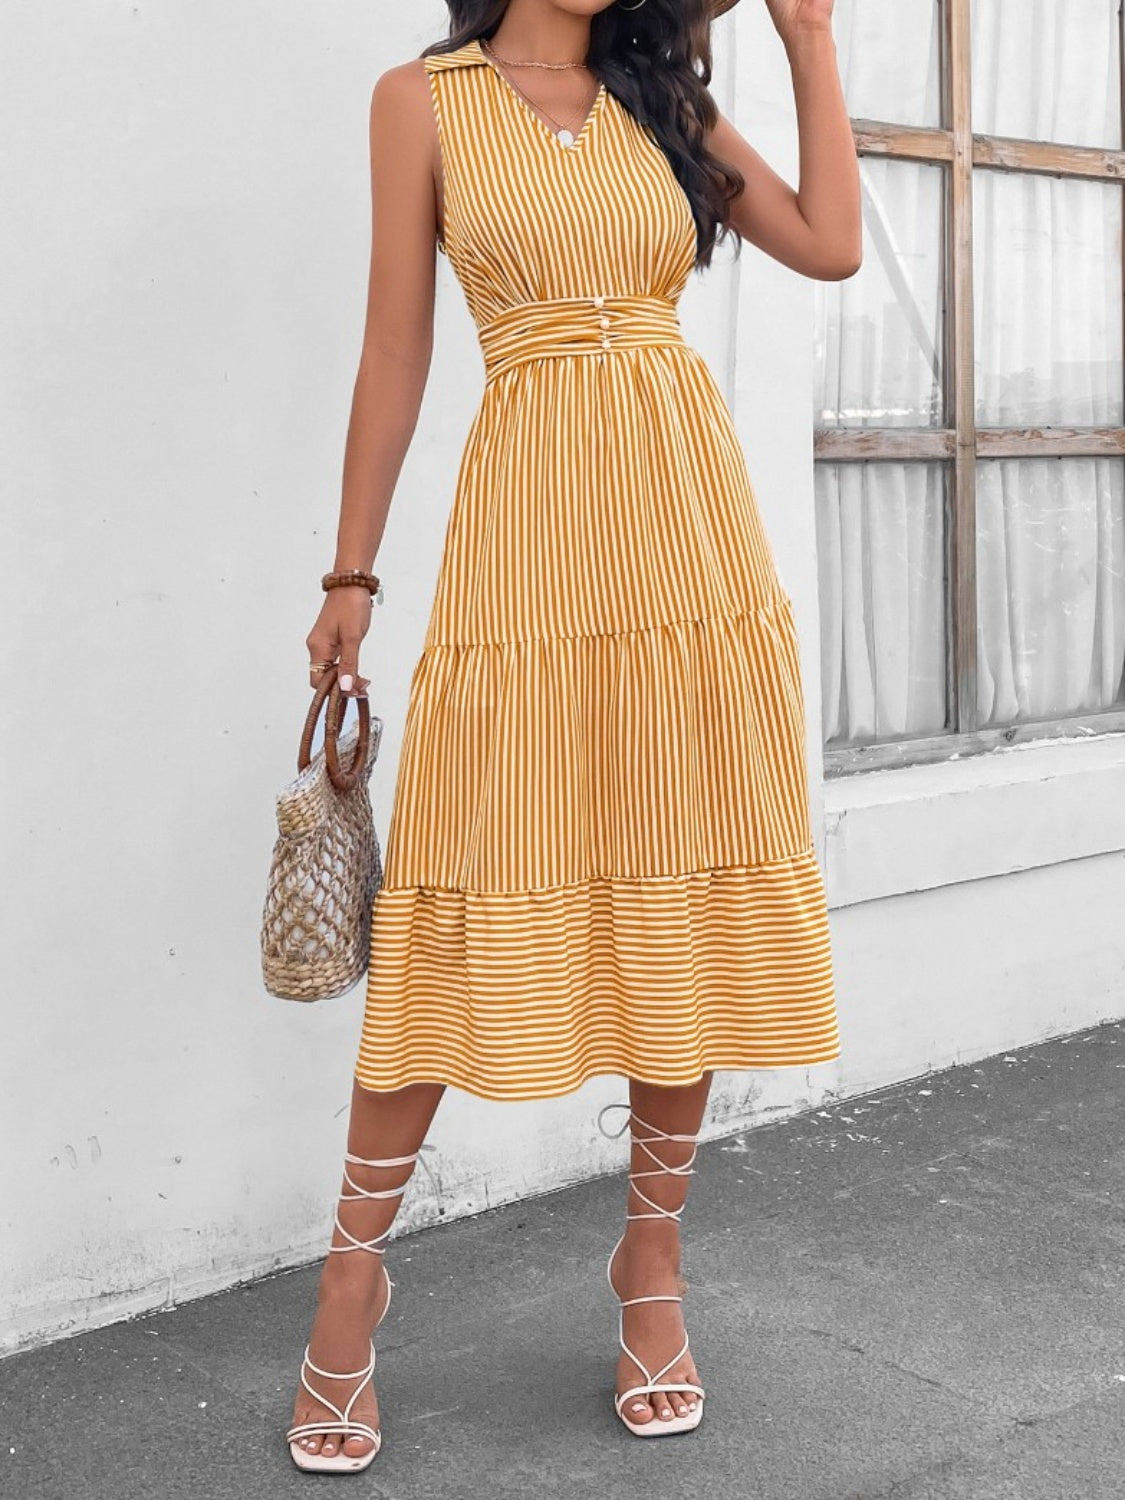 Chic striped midi dress with Johnny collar and waist cinching. Versatile, with pockets and available in 7 colors. Perfect for any occasion.